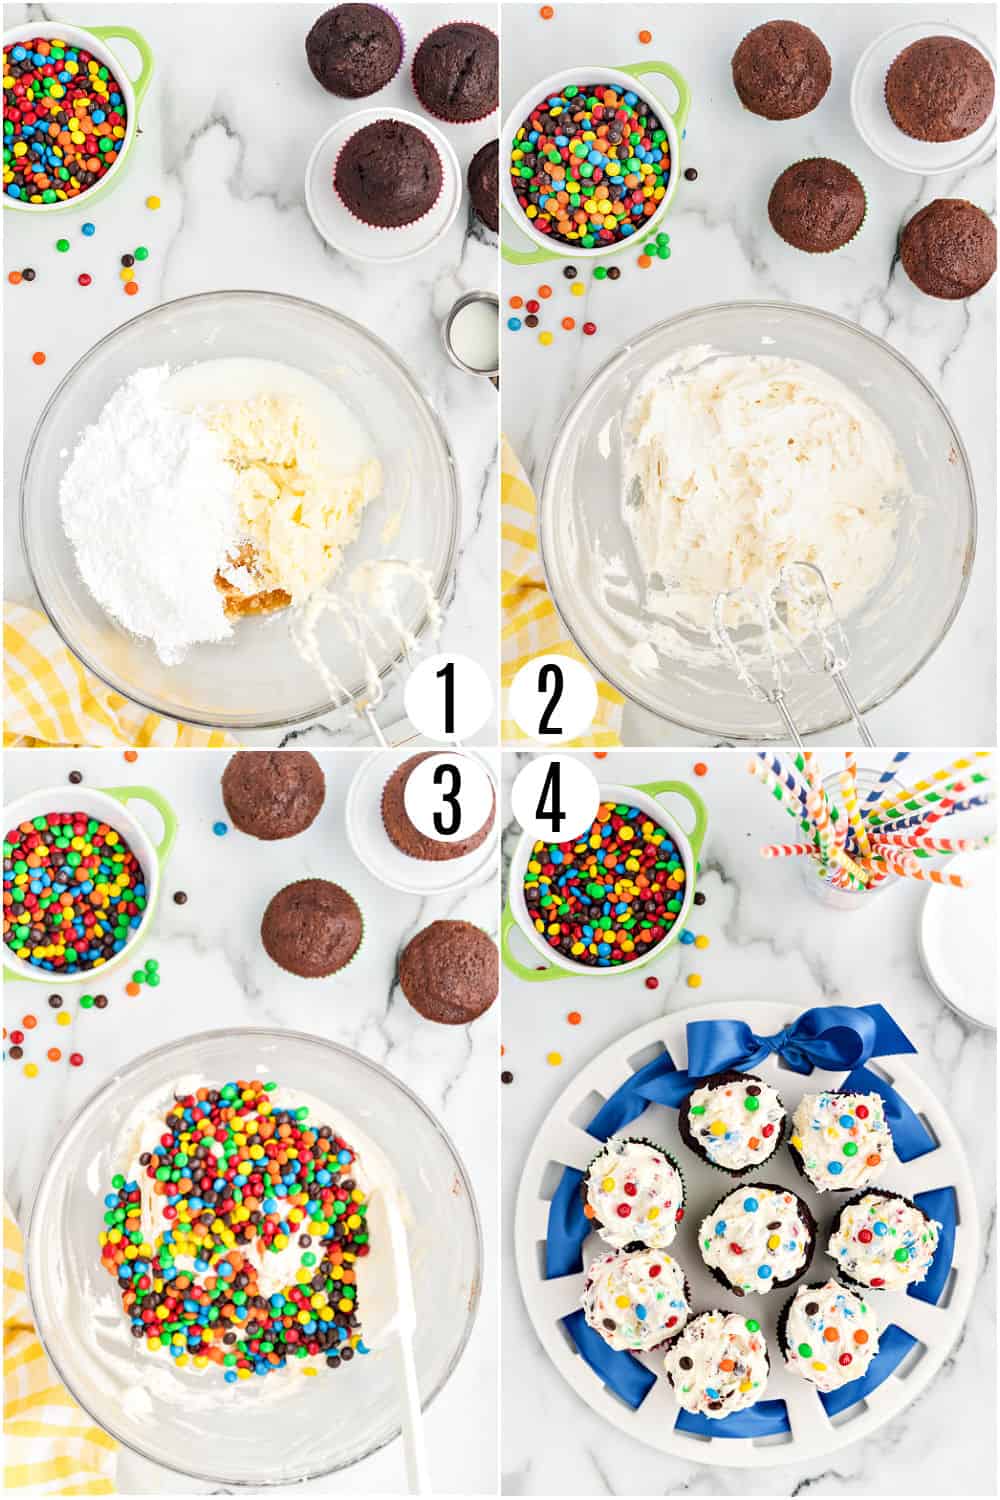 Step by step photos showing how to make chocolate cupcakes with M&M frosting.